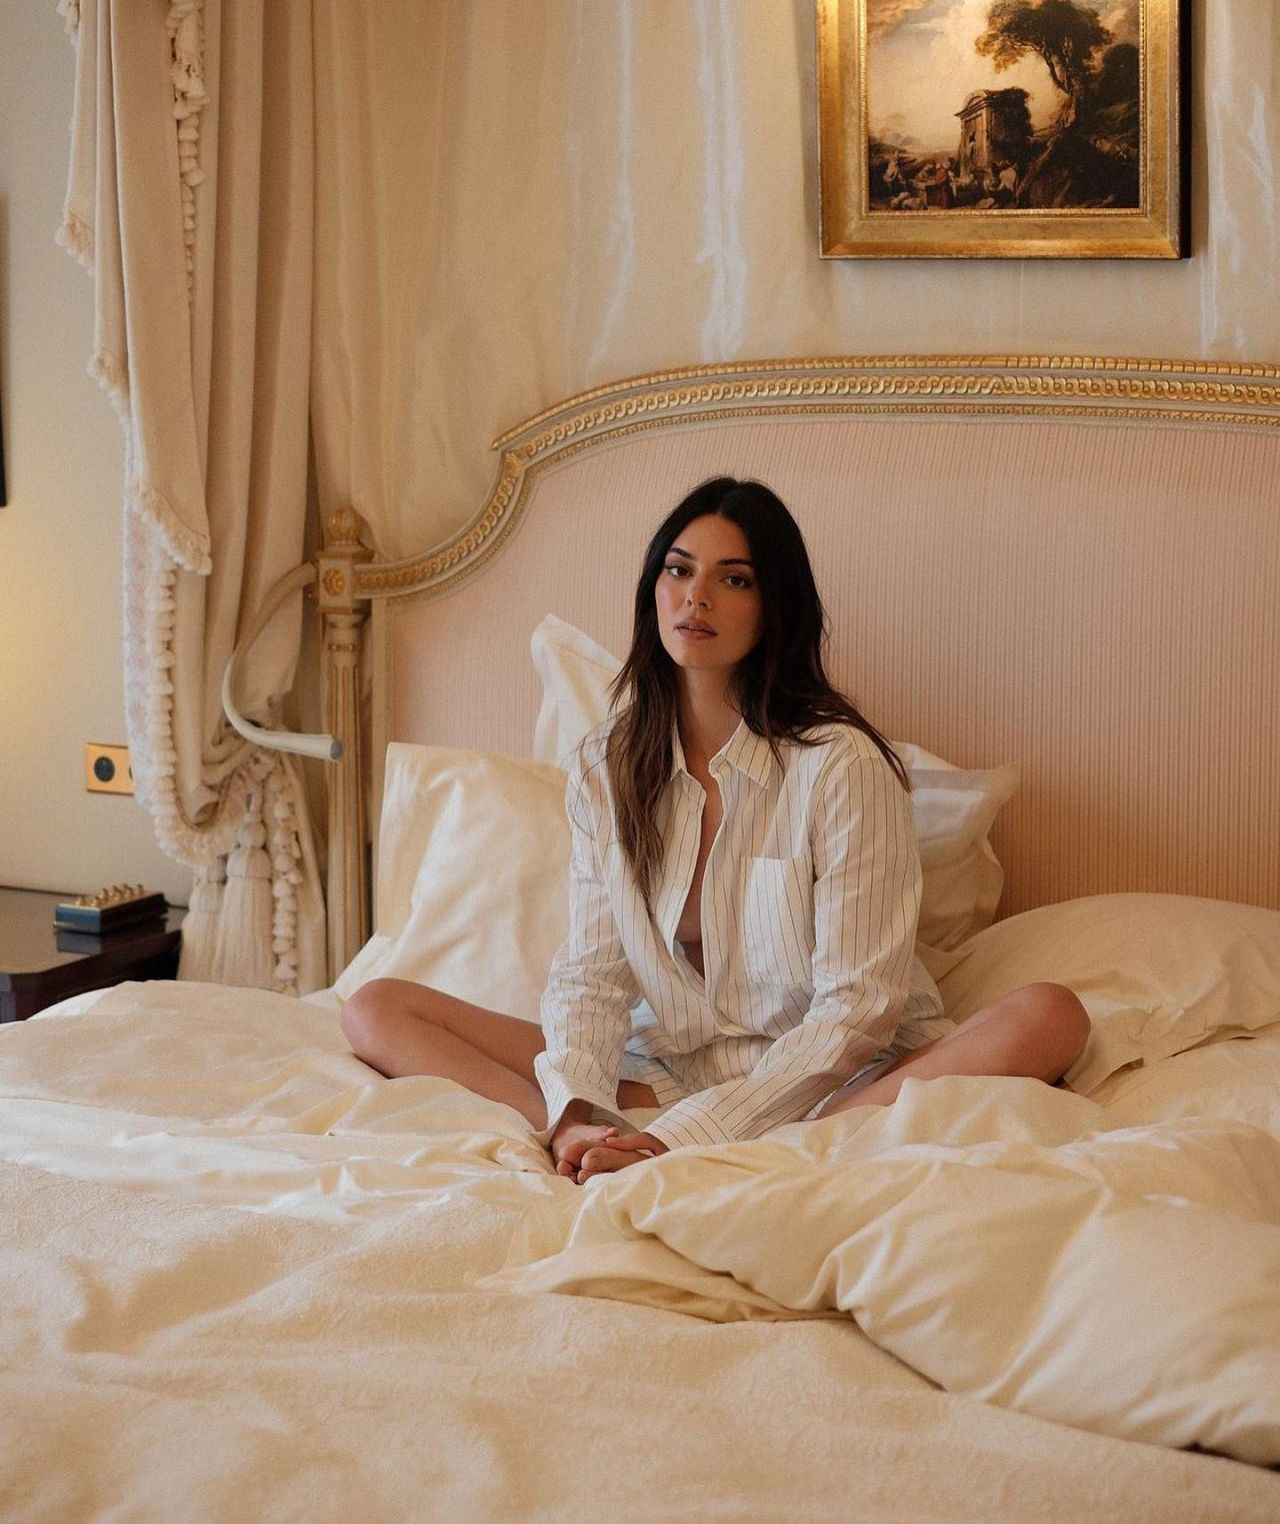 Kendall Jenner Sultry and Sexy Teasing in Bed